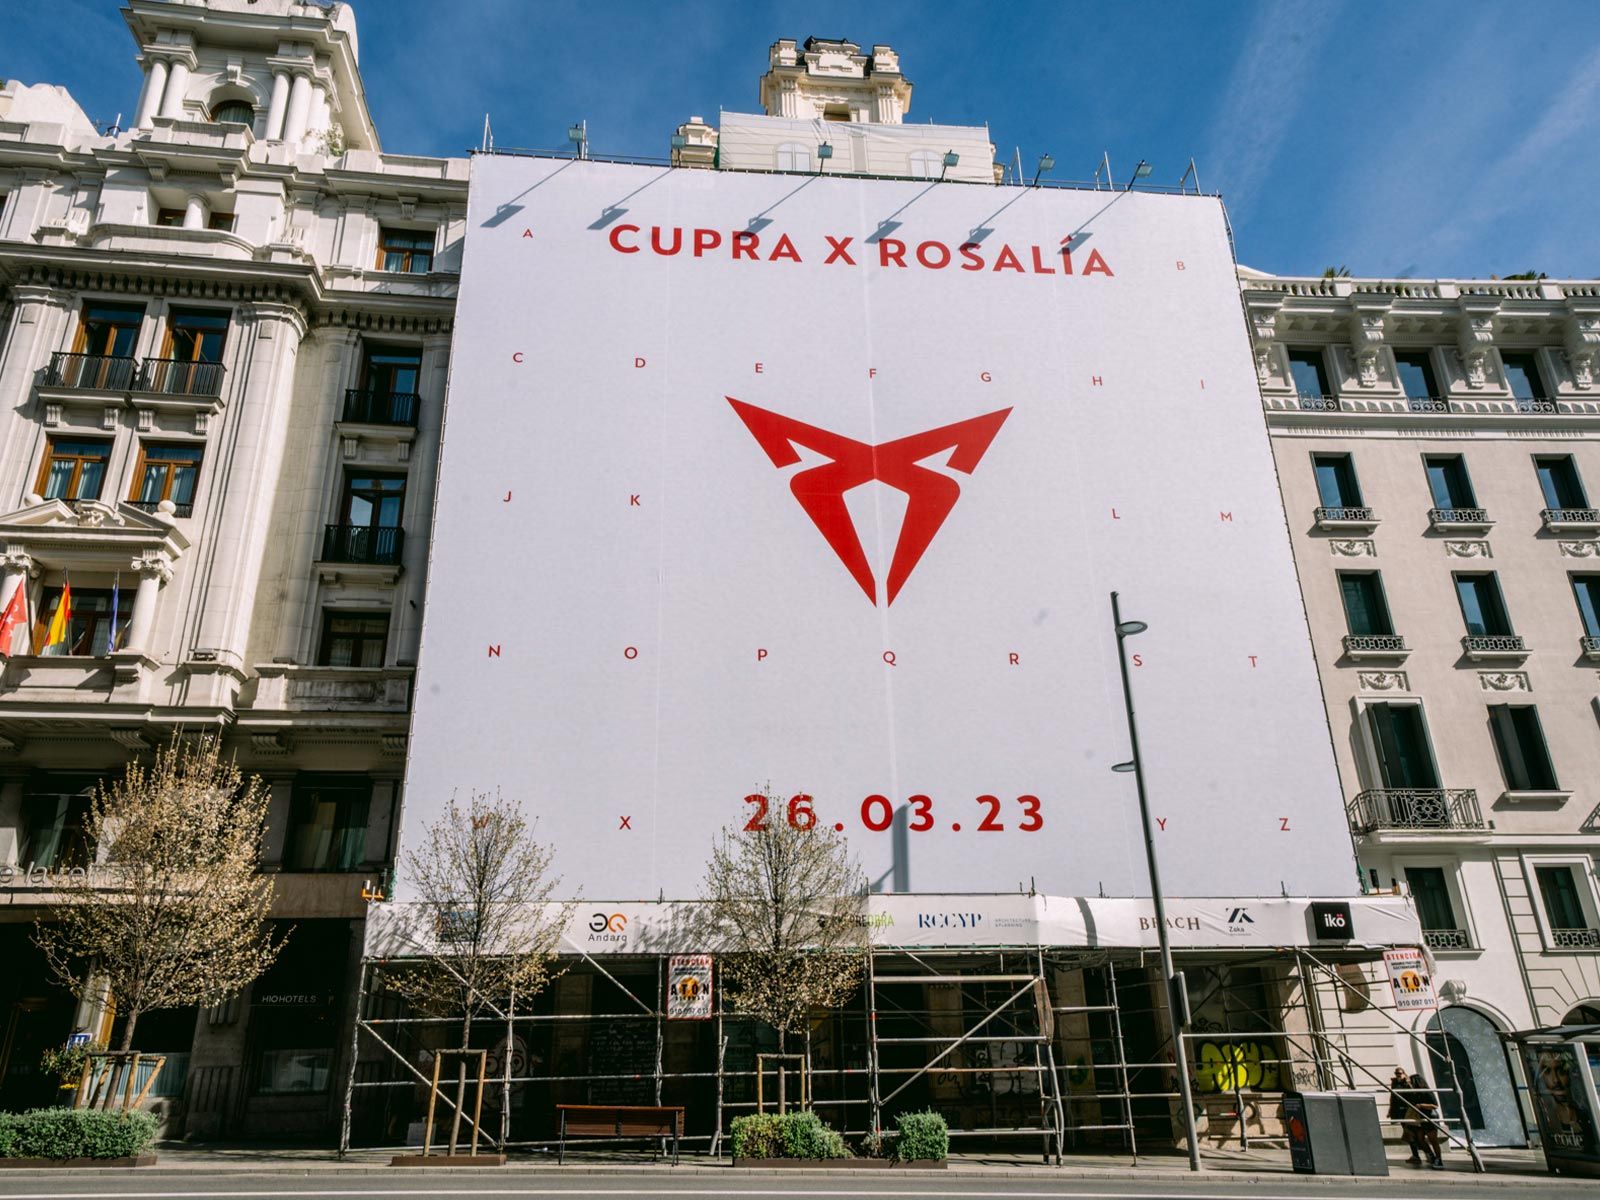 CUPRA and Rosalía team up for a very special collaboration